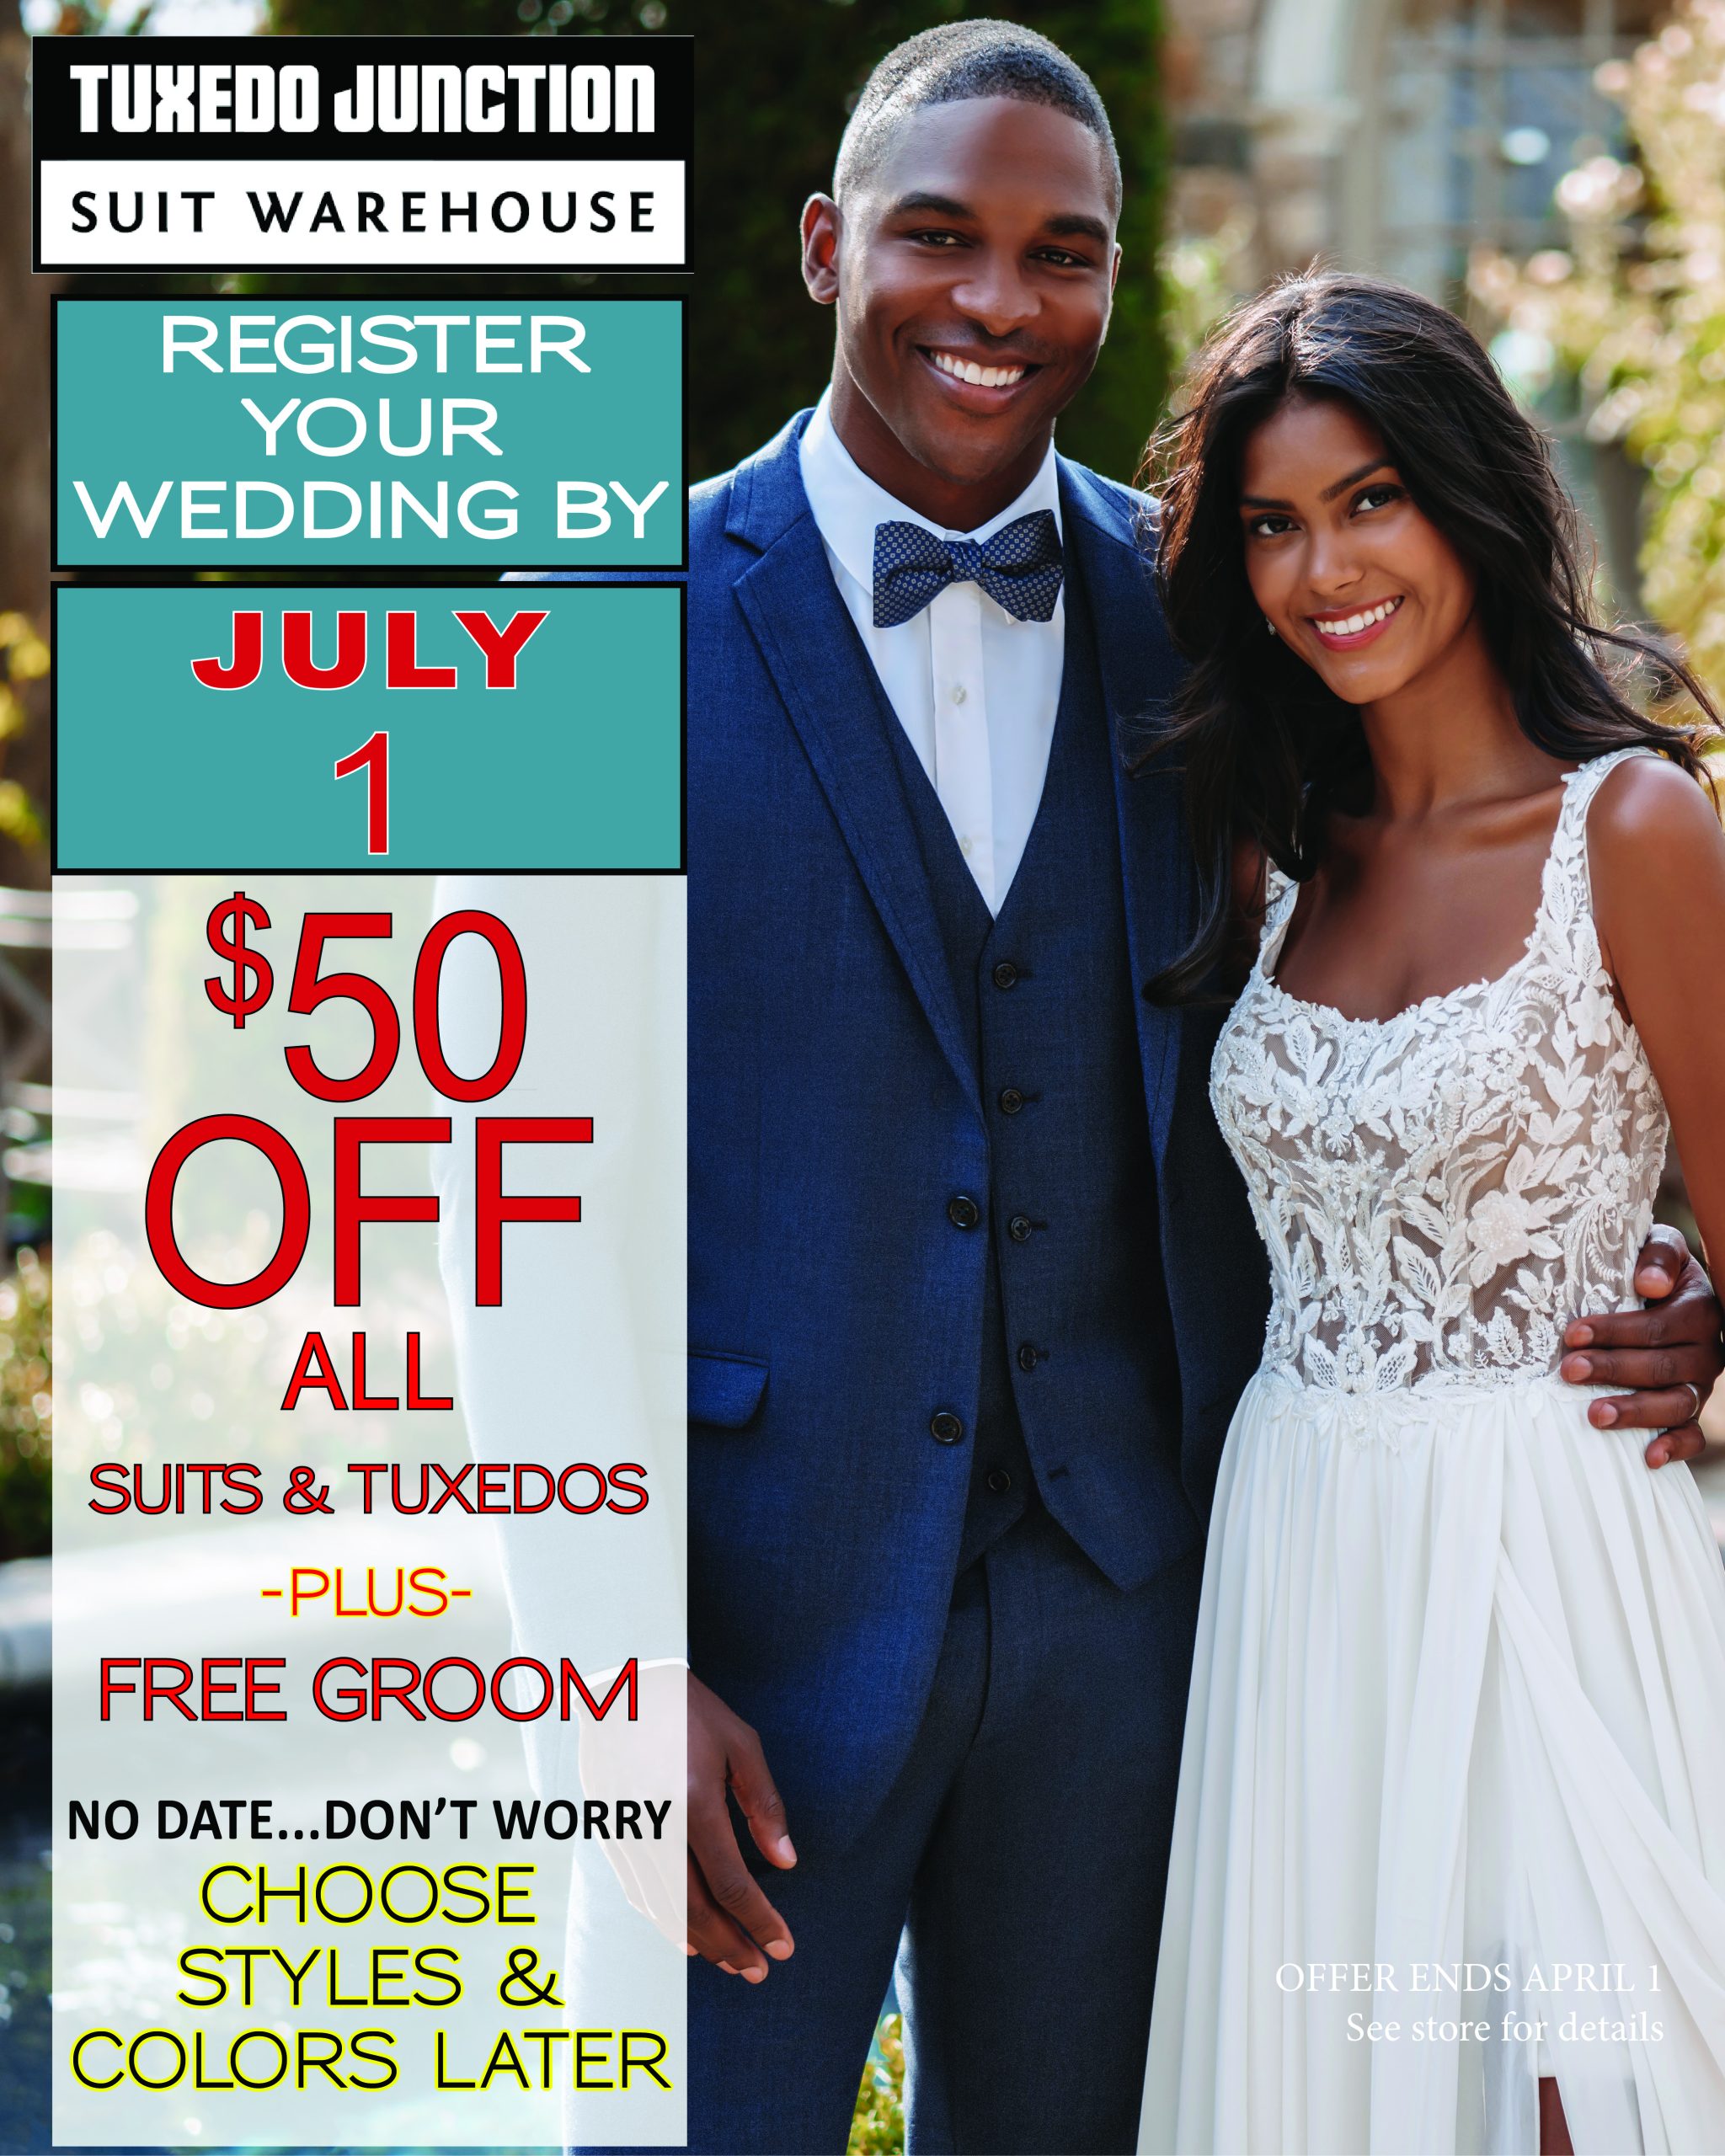 Reserve your wedding NOW and save $50 off suits and tuxes